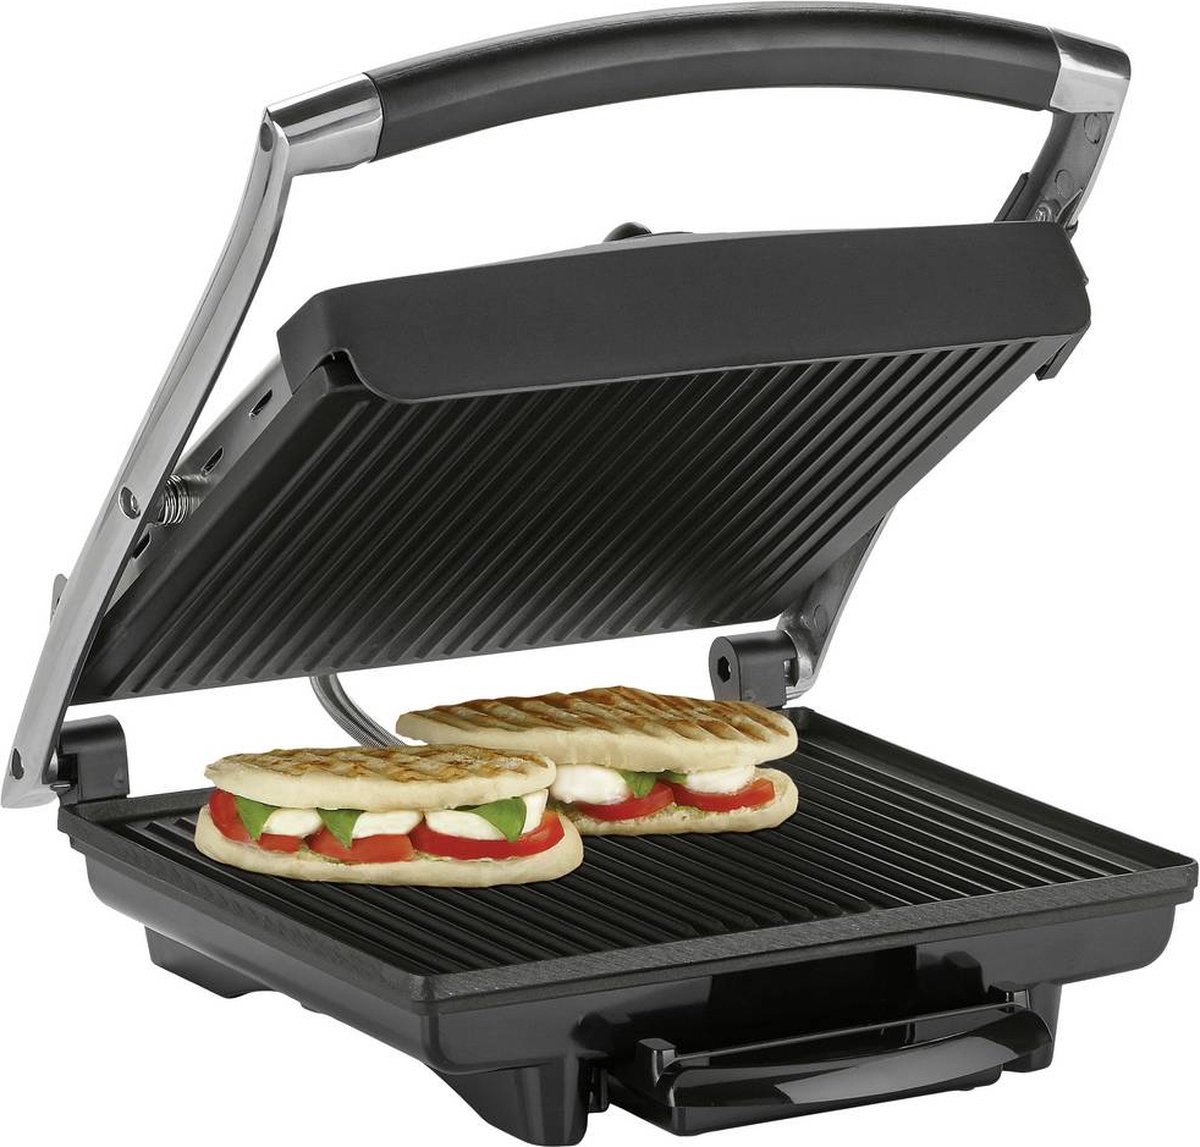 Contact grill extra groot– Panini Grill XXL Regelbare thermostaat tosti apparaat– Zwart RVS- contact grill- multifunctioneel- contactgrill- tostiapparaat